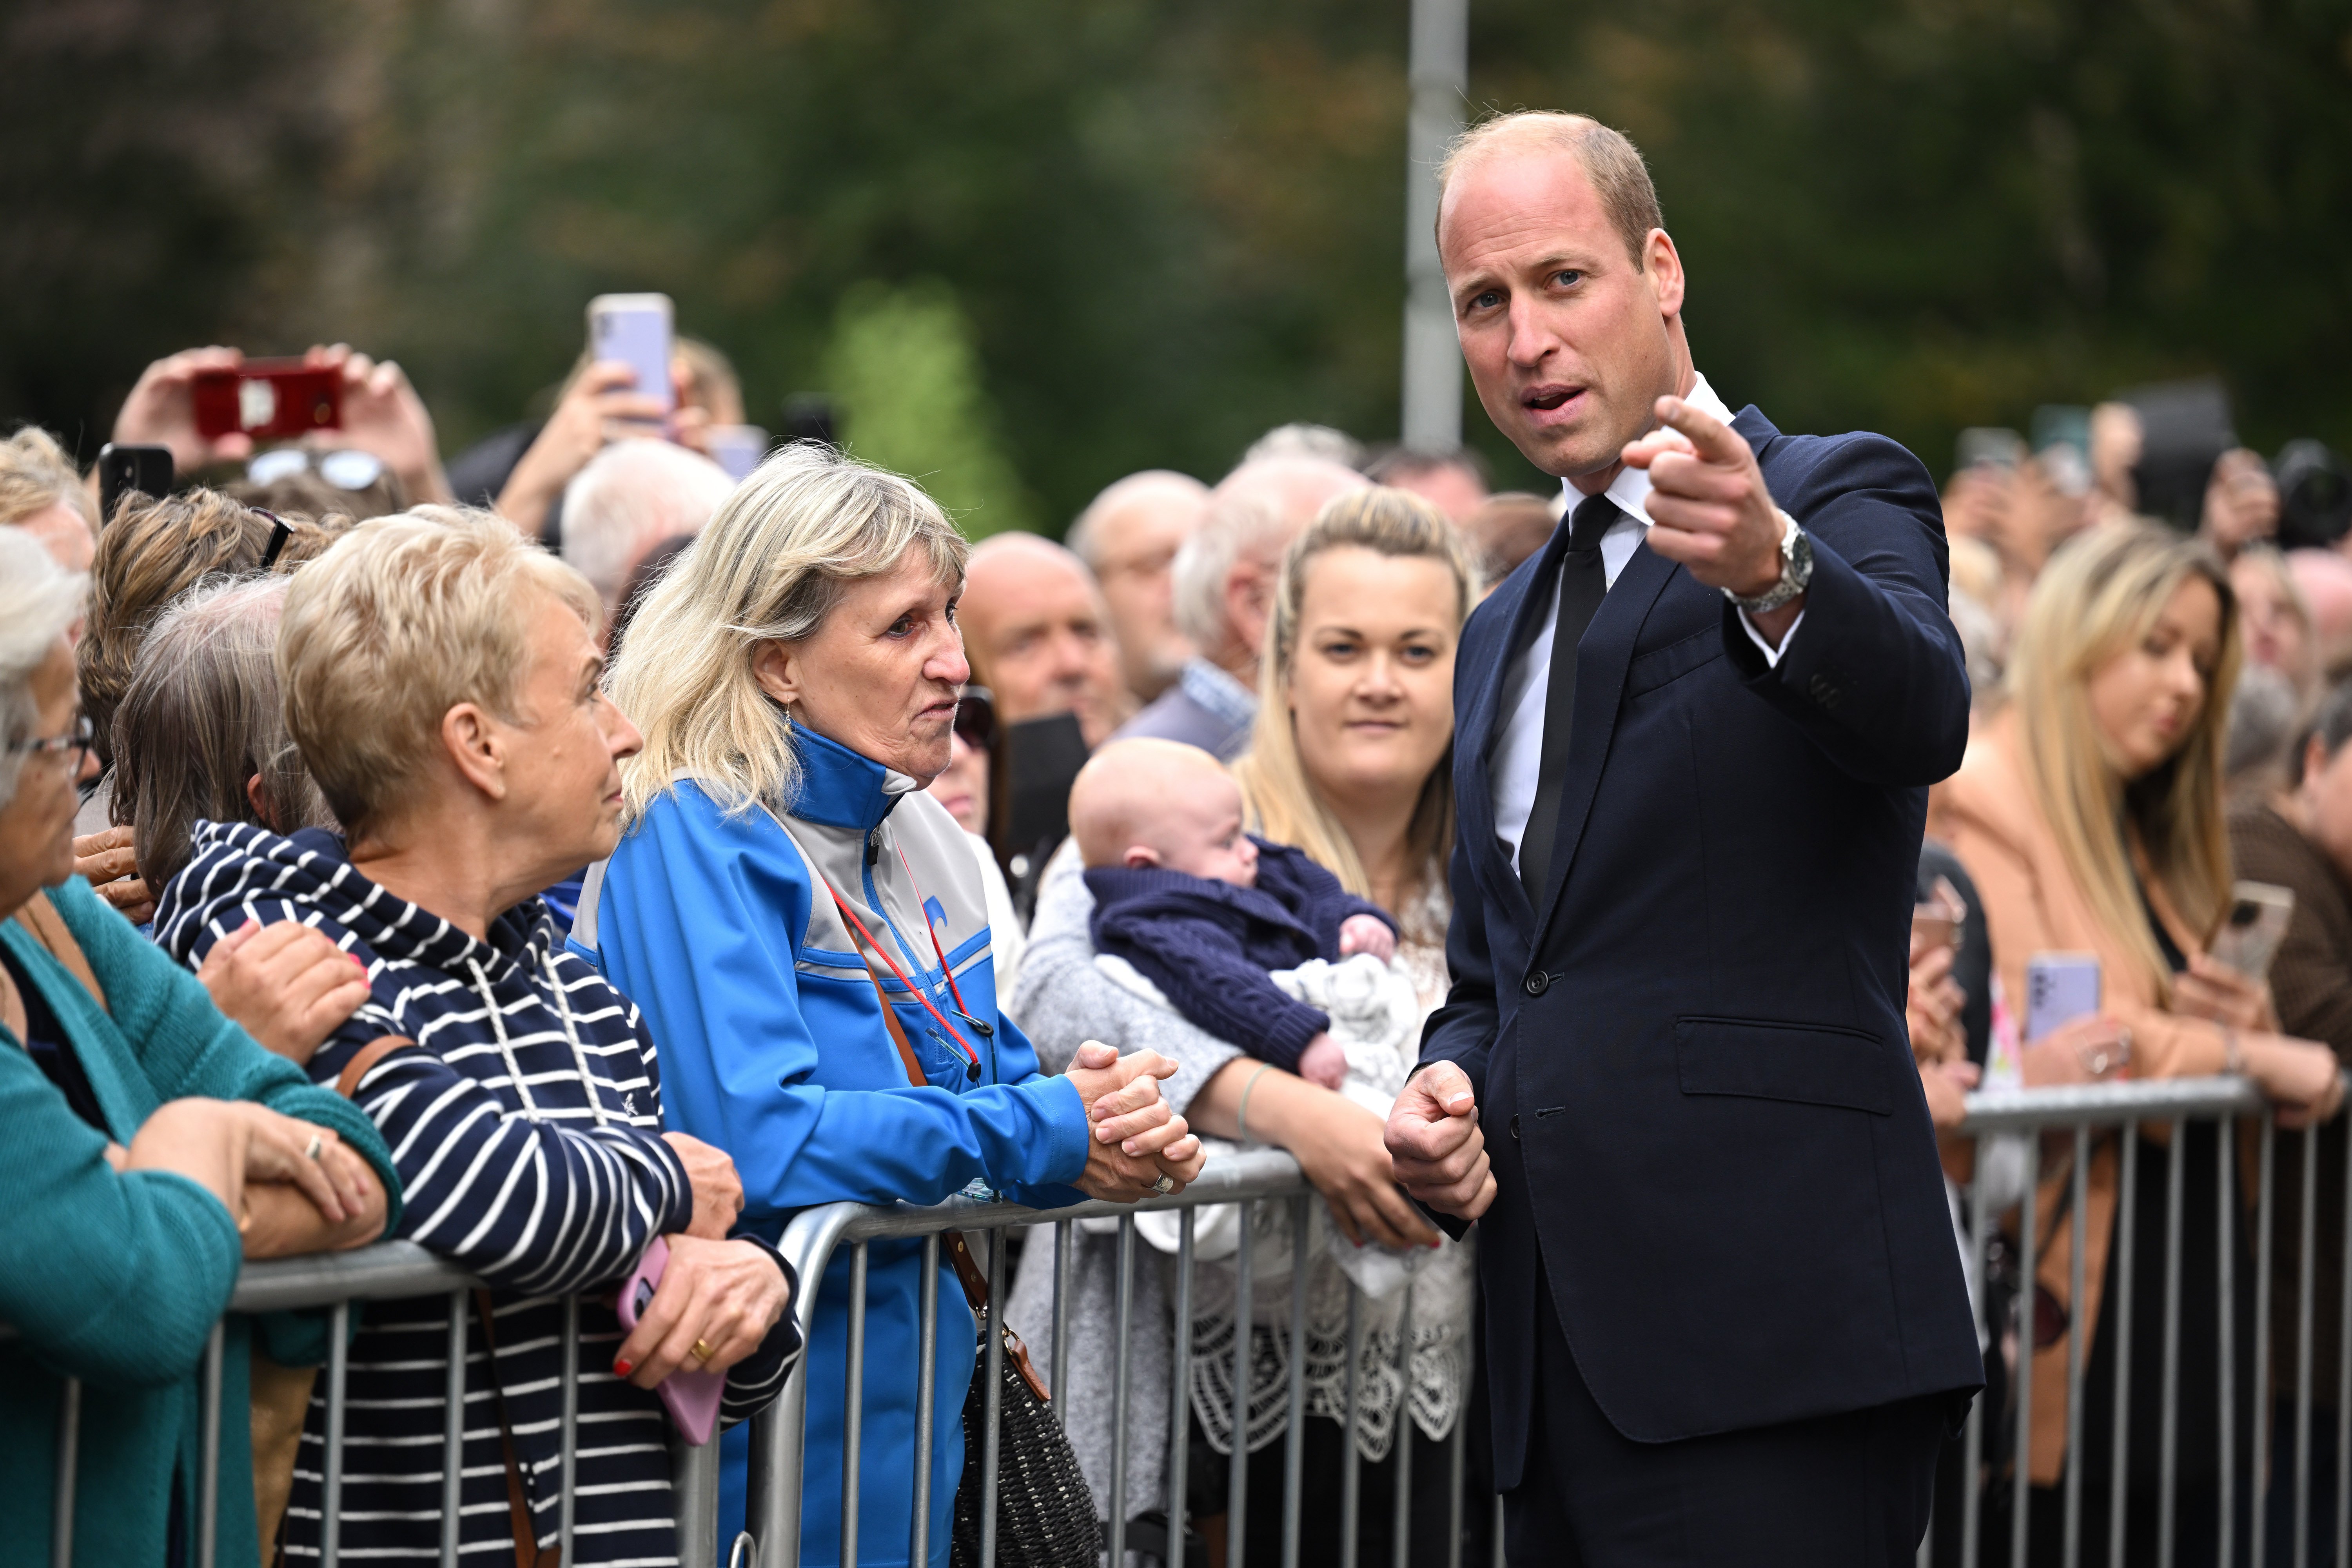 Prince William interacting with people in Sandringham, England 2022. | Source: Getty Images 